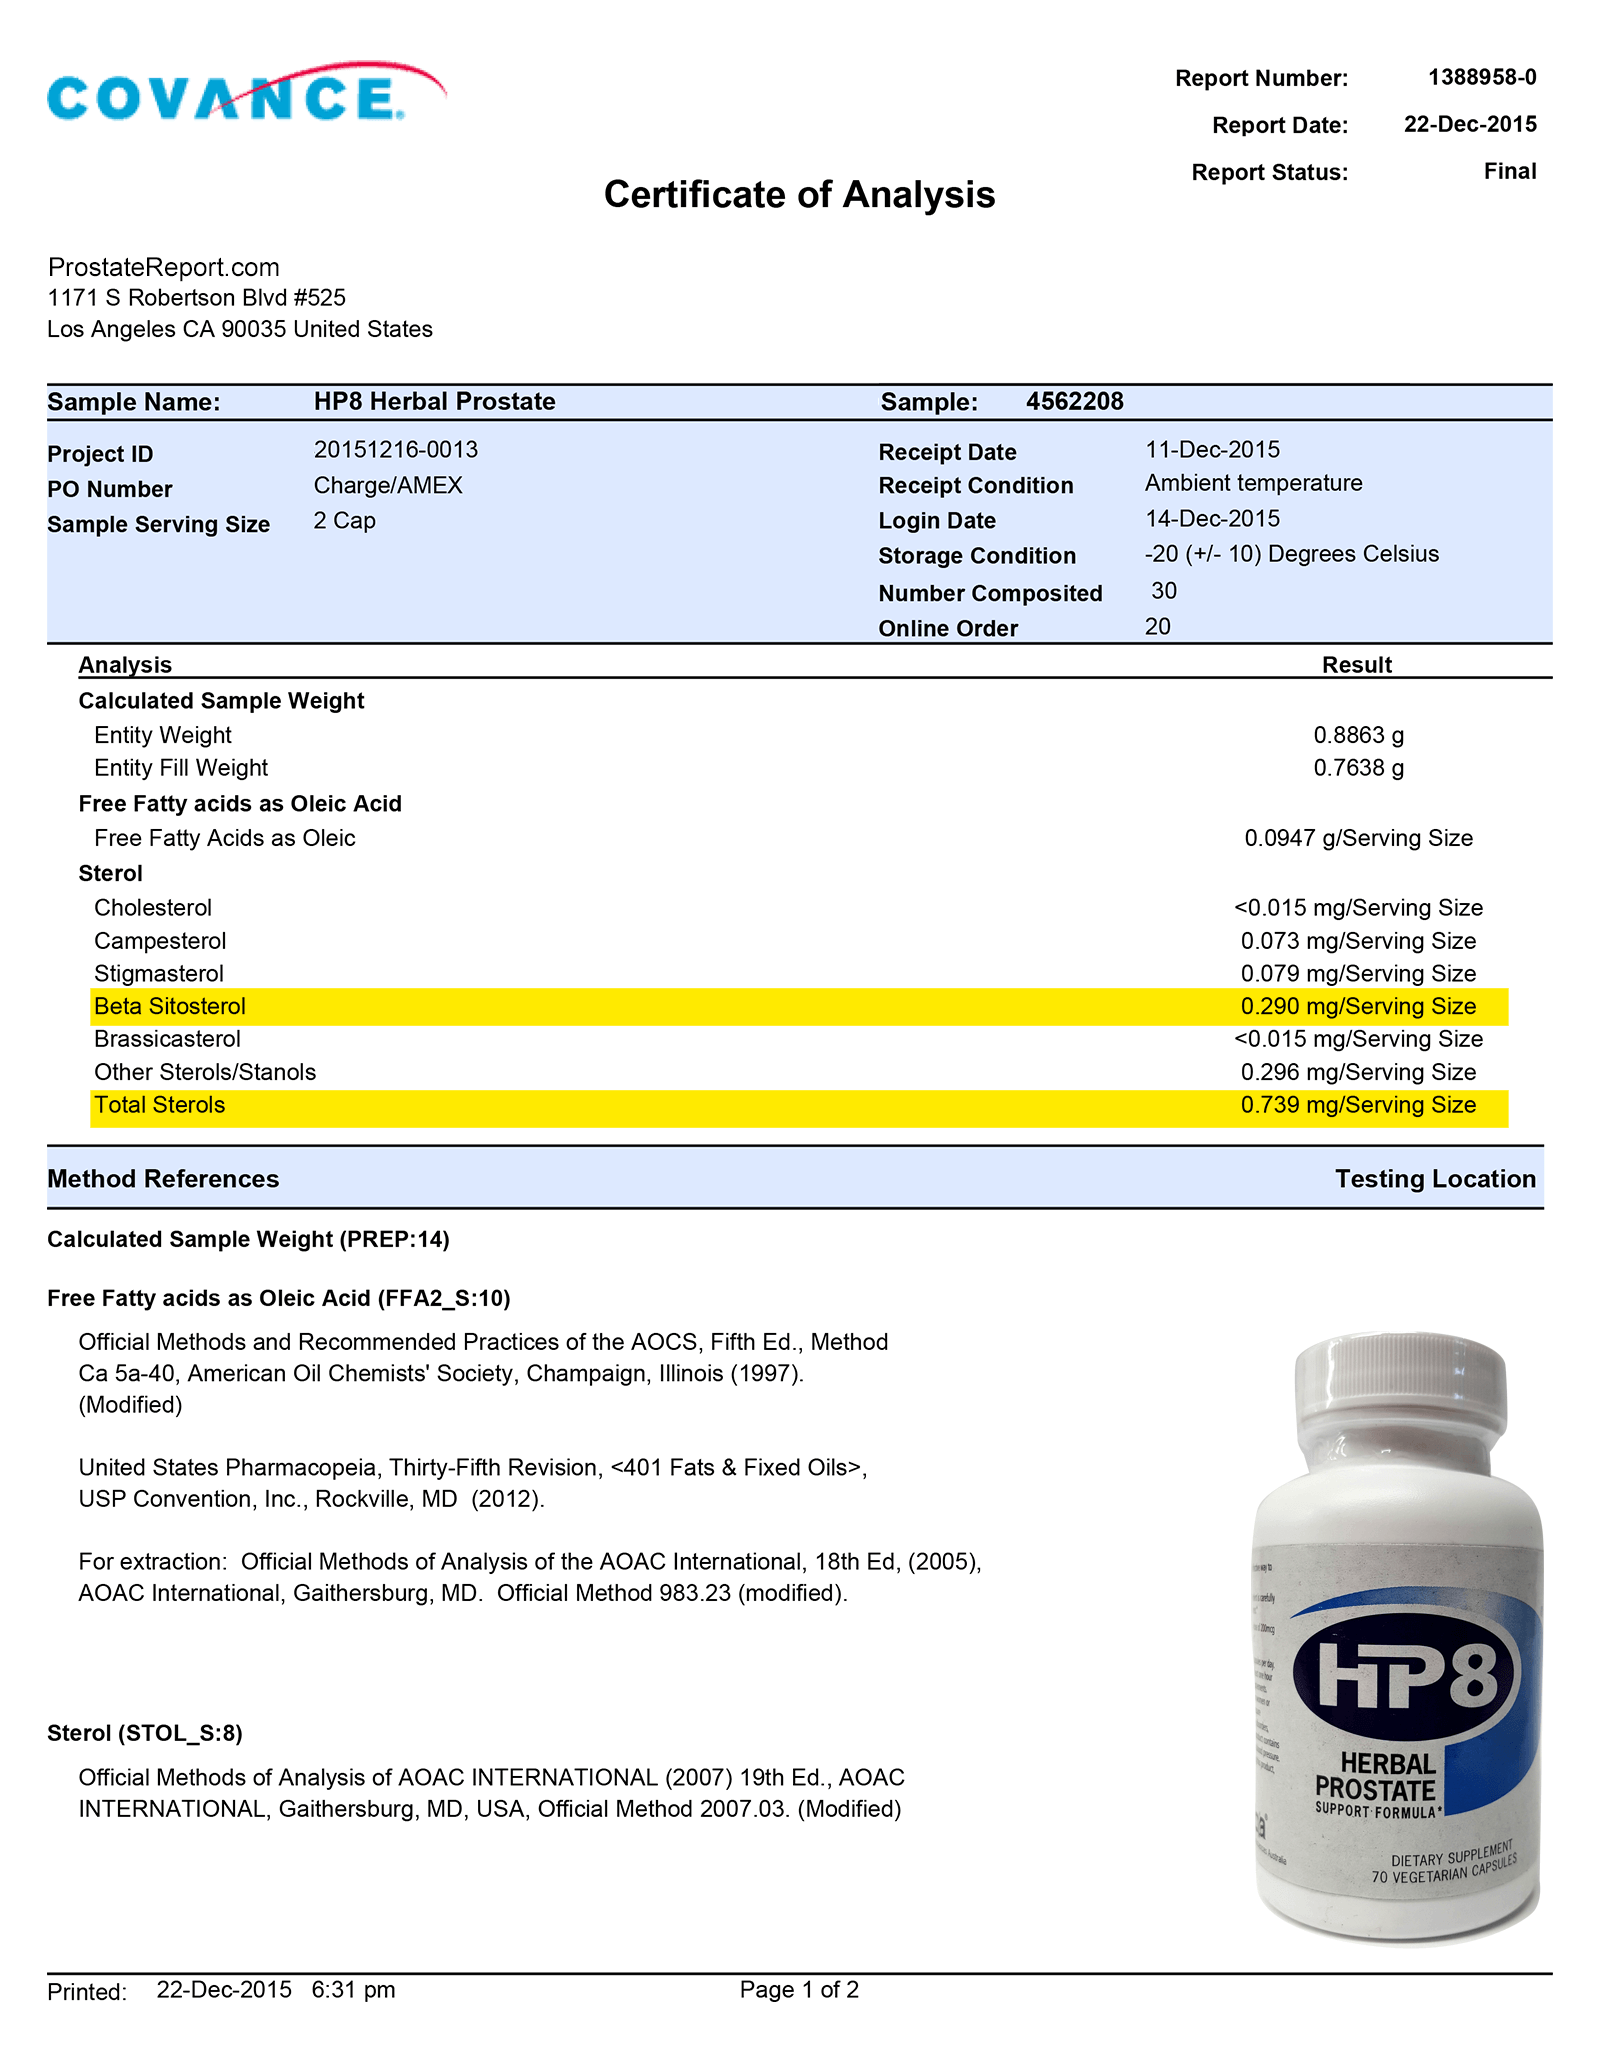 HP8 Herbal Prostate lab report 